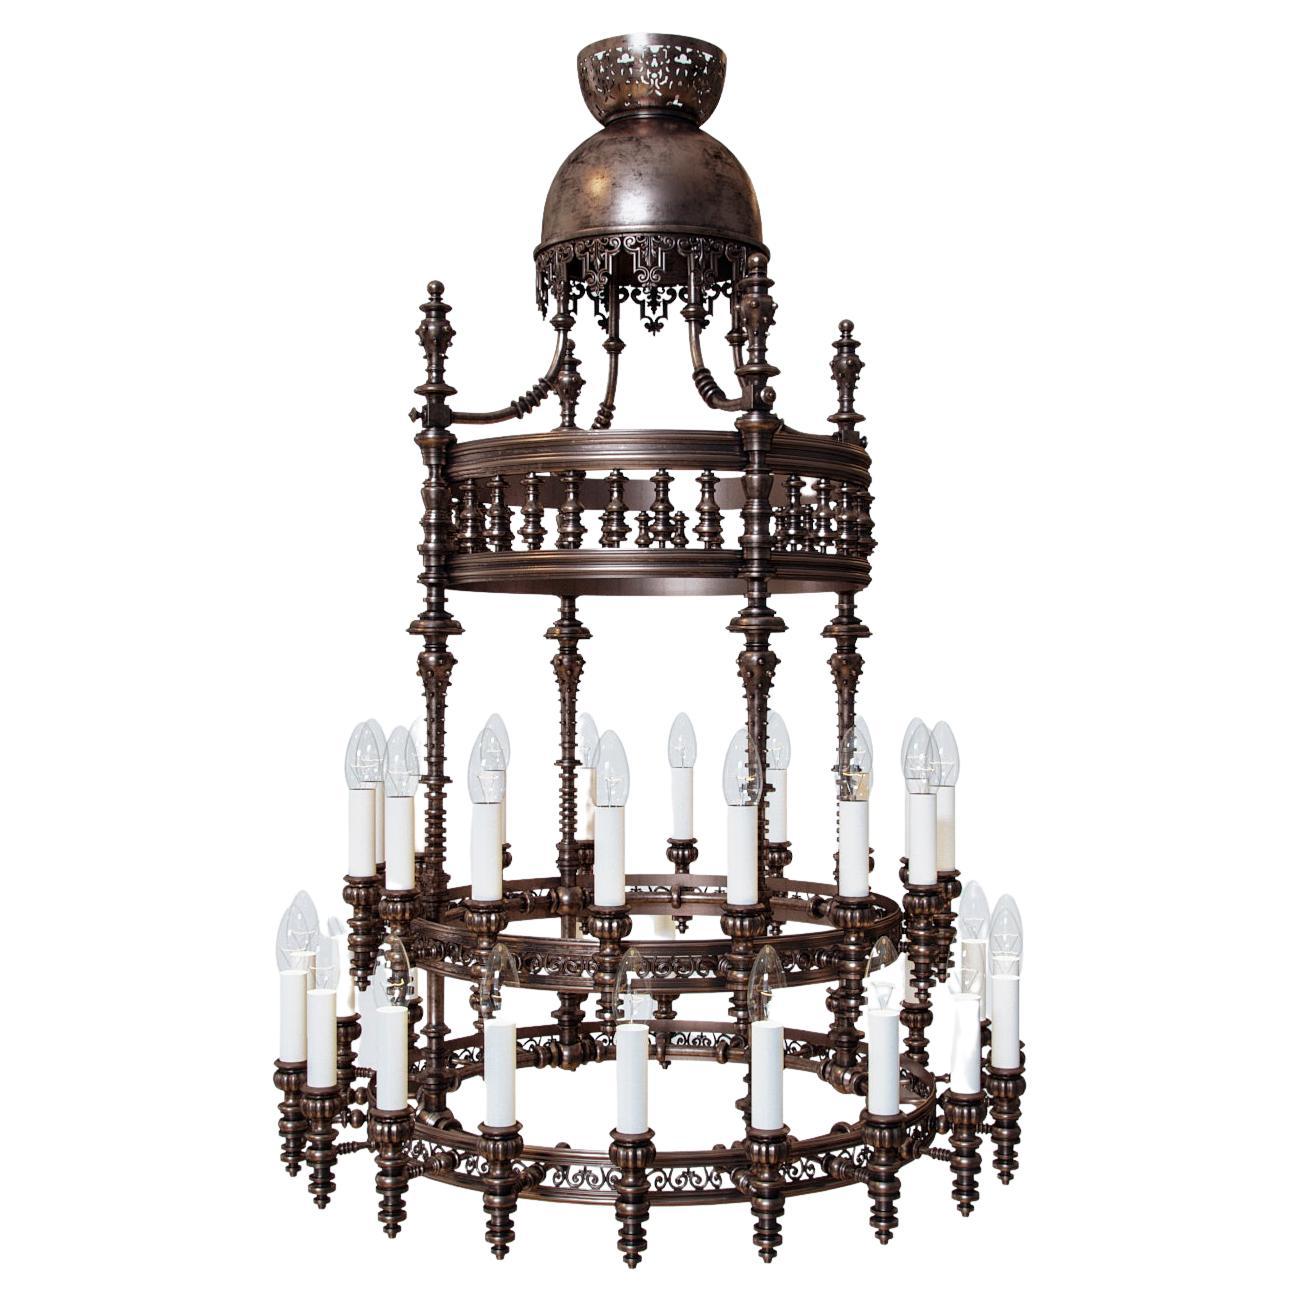 Original Documented Otto Wagner's Private Belonging Dining Room Chandelier